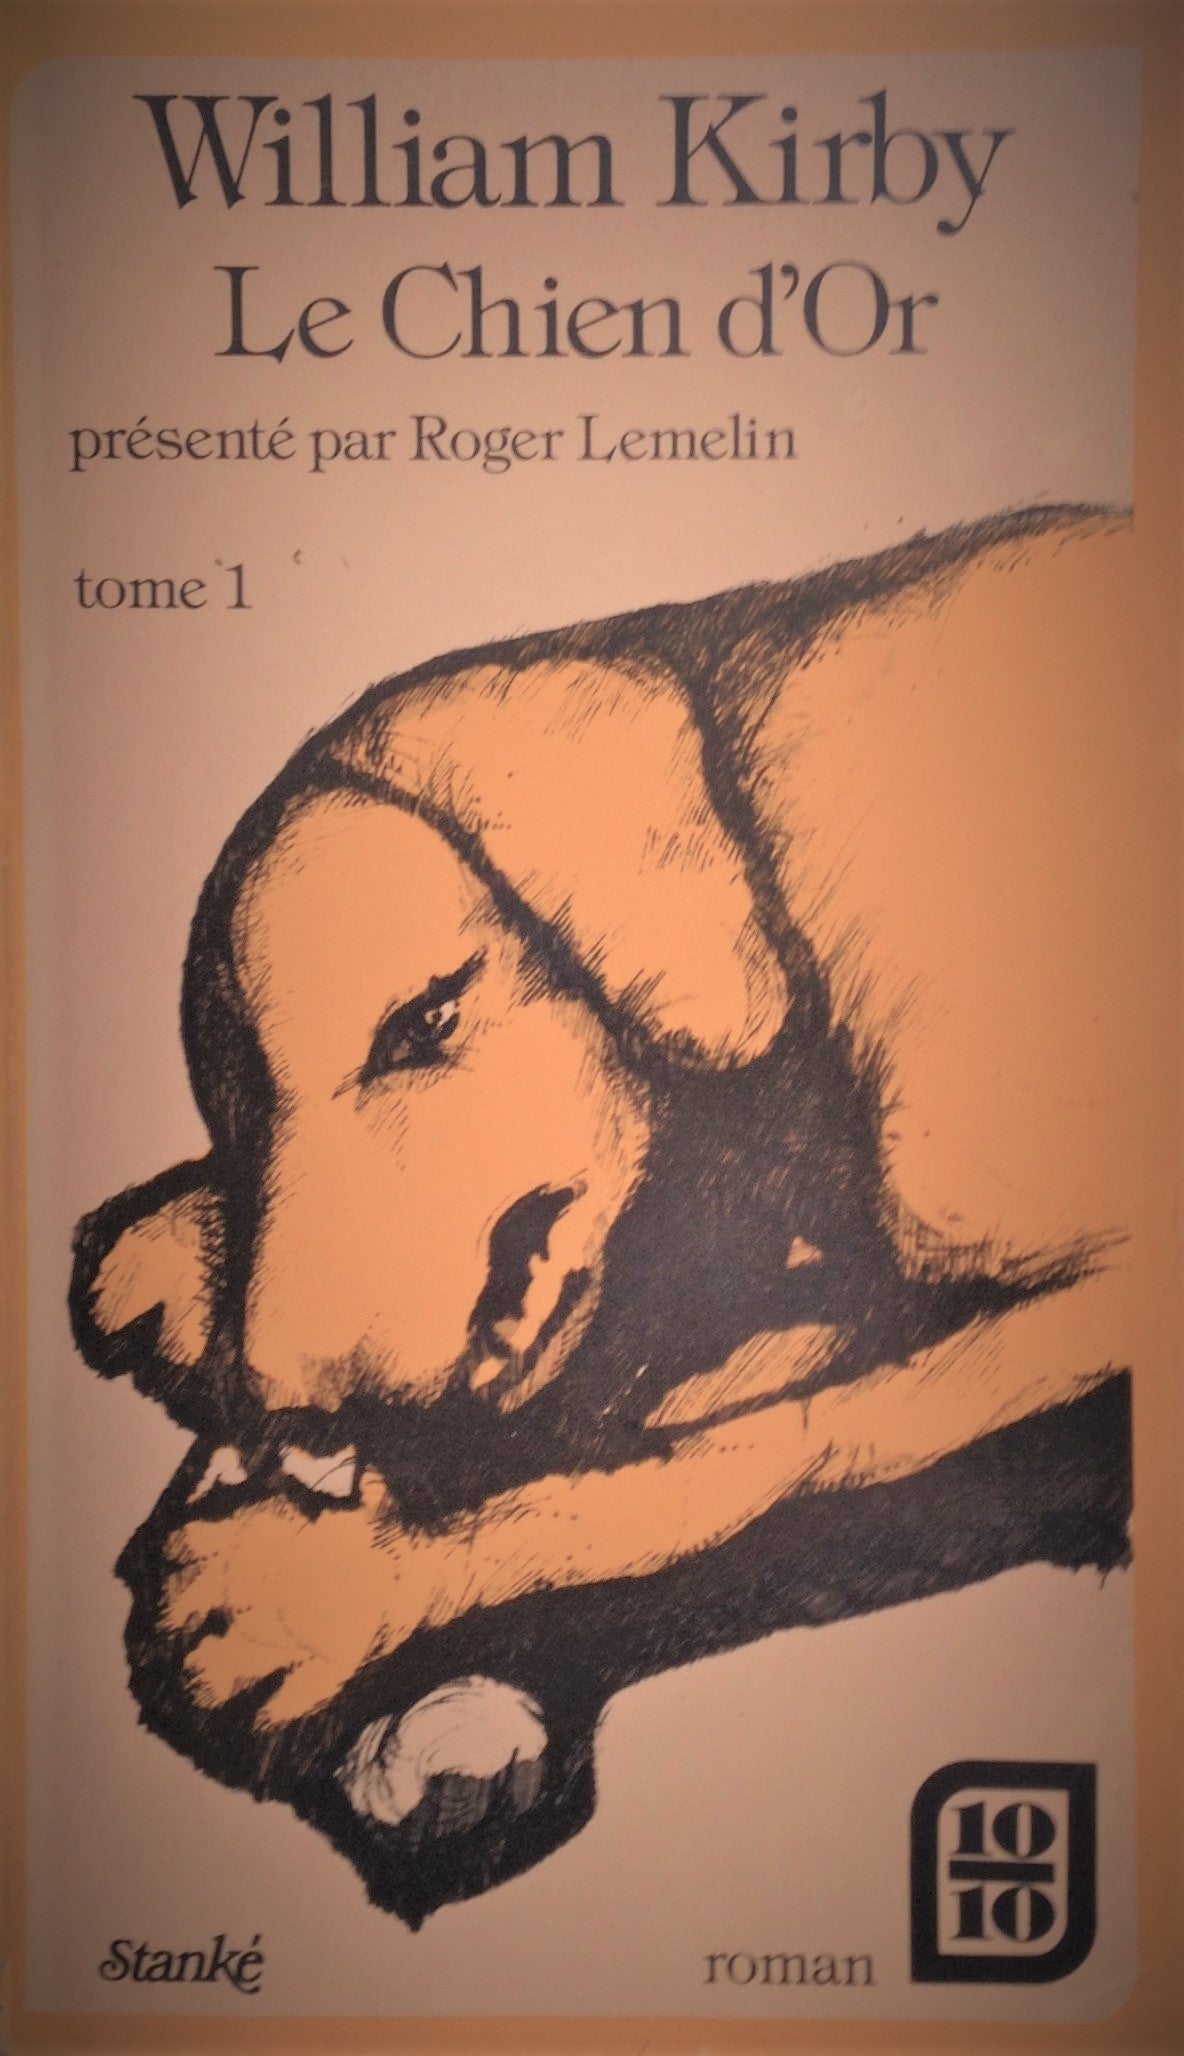 Livre ISBN 2760403327 Le chien d'Or # 1 (William Kirby)